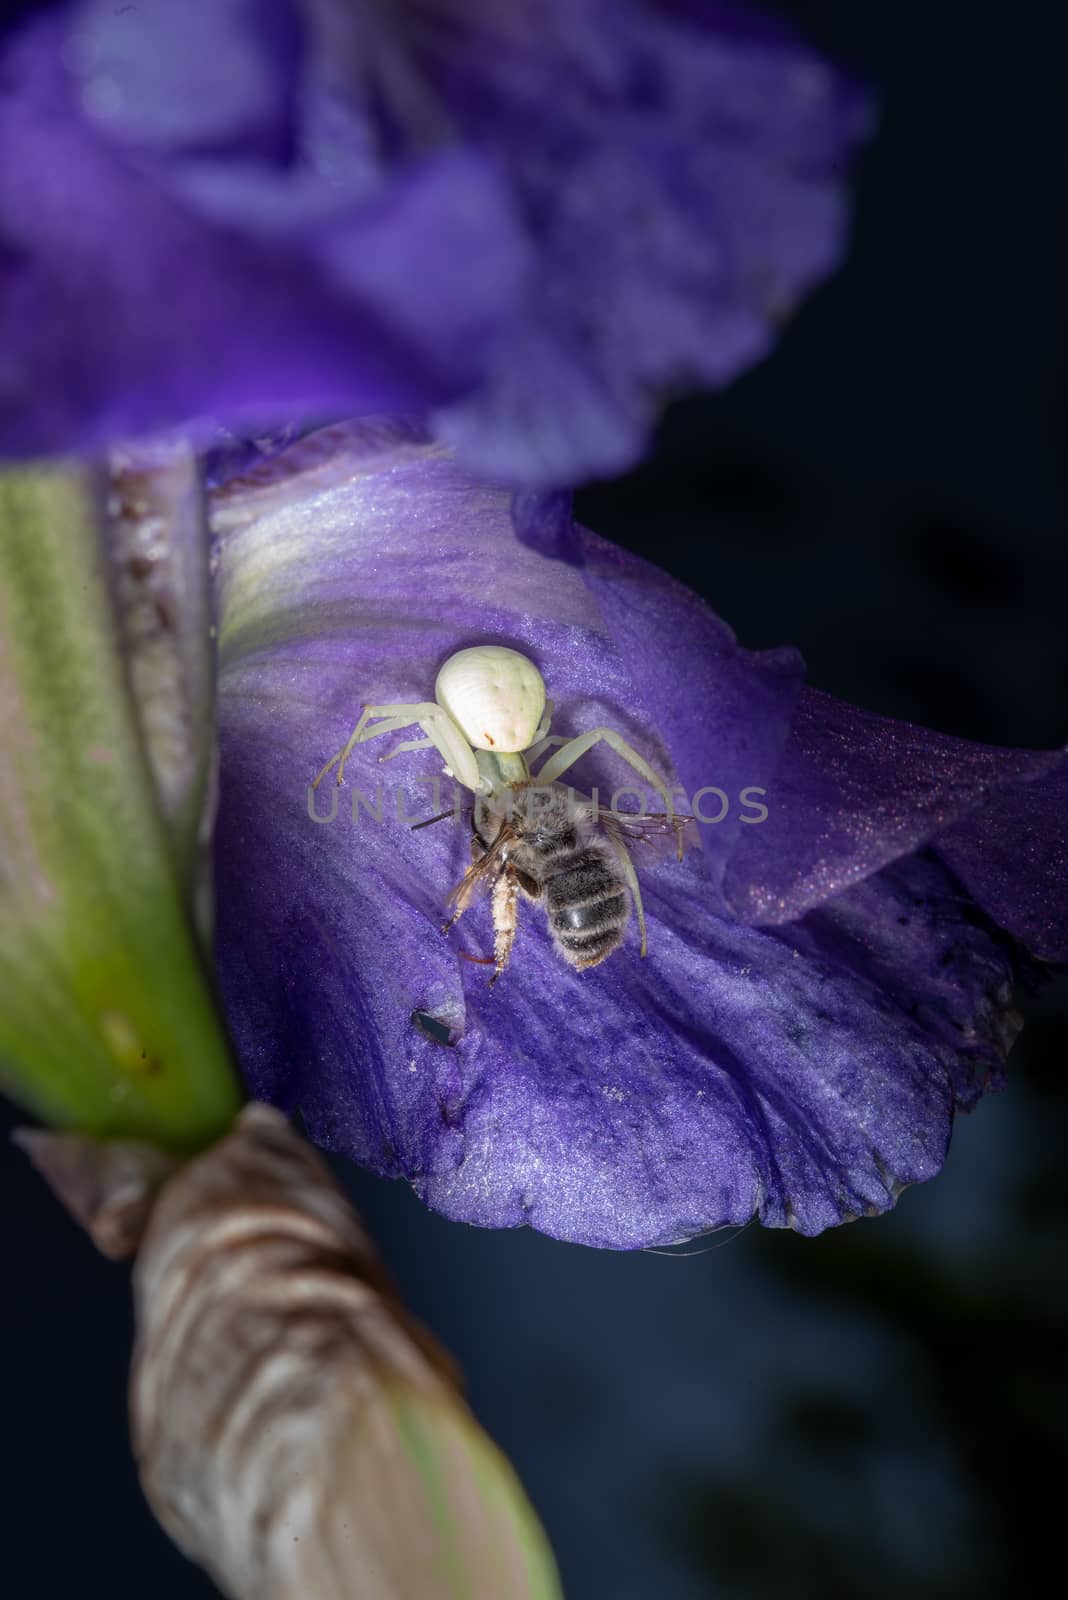 Macro Closeup of a white crab spider feasting on catched bee on Bearded iris, home garden insects